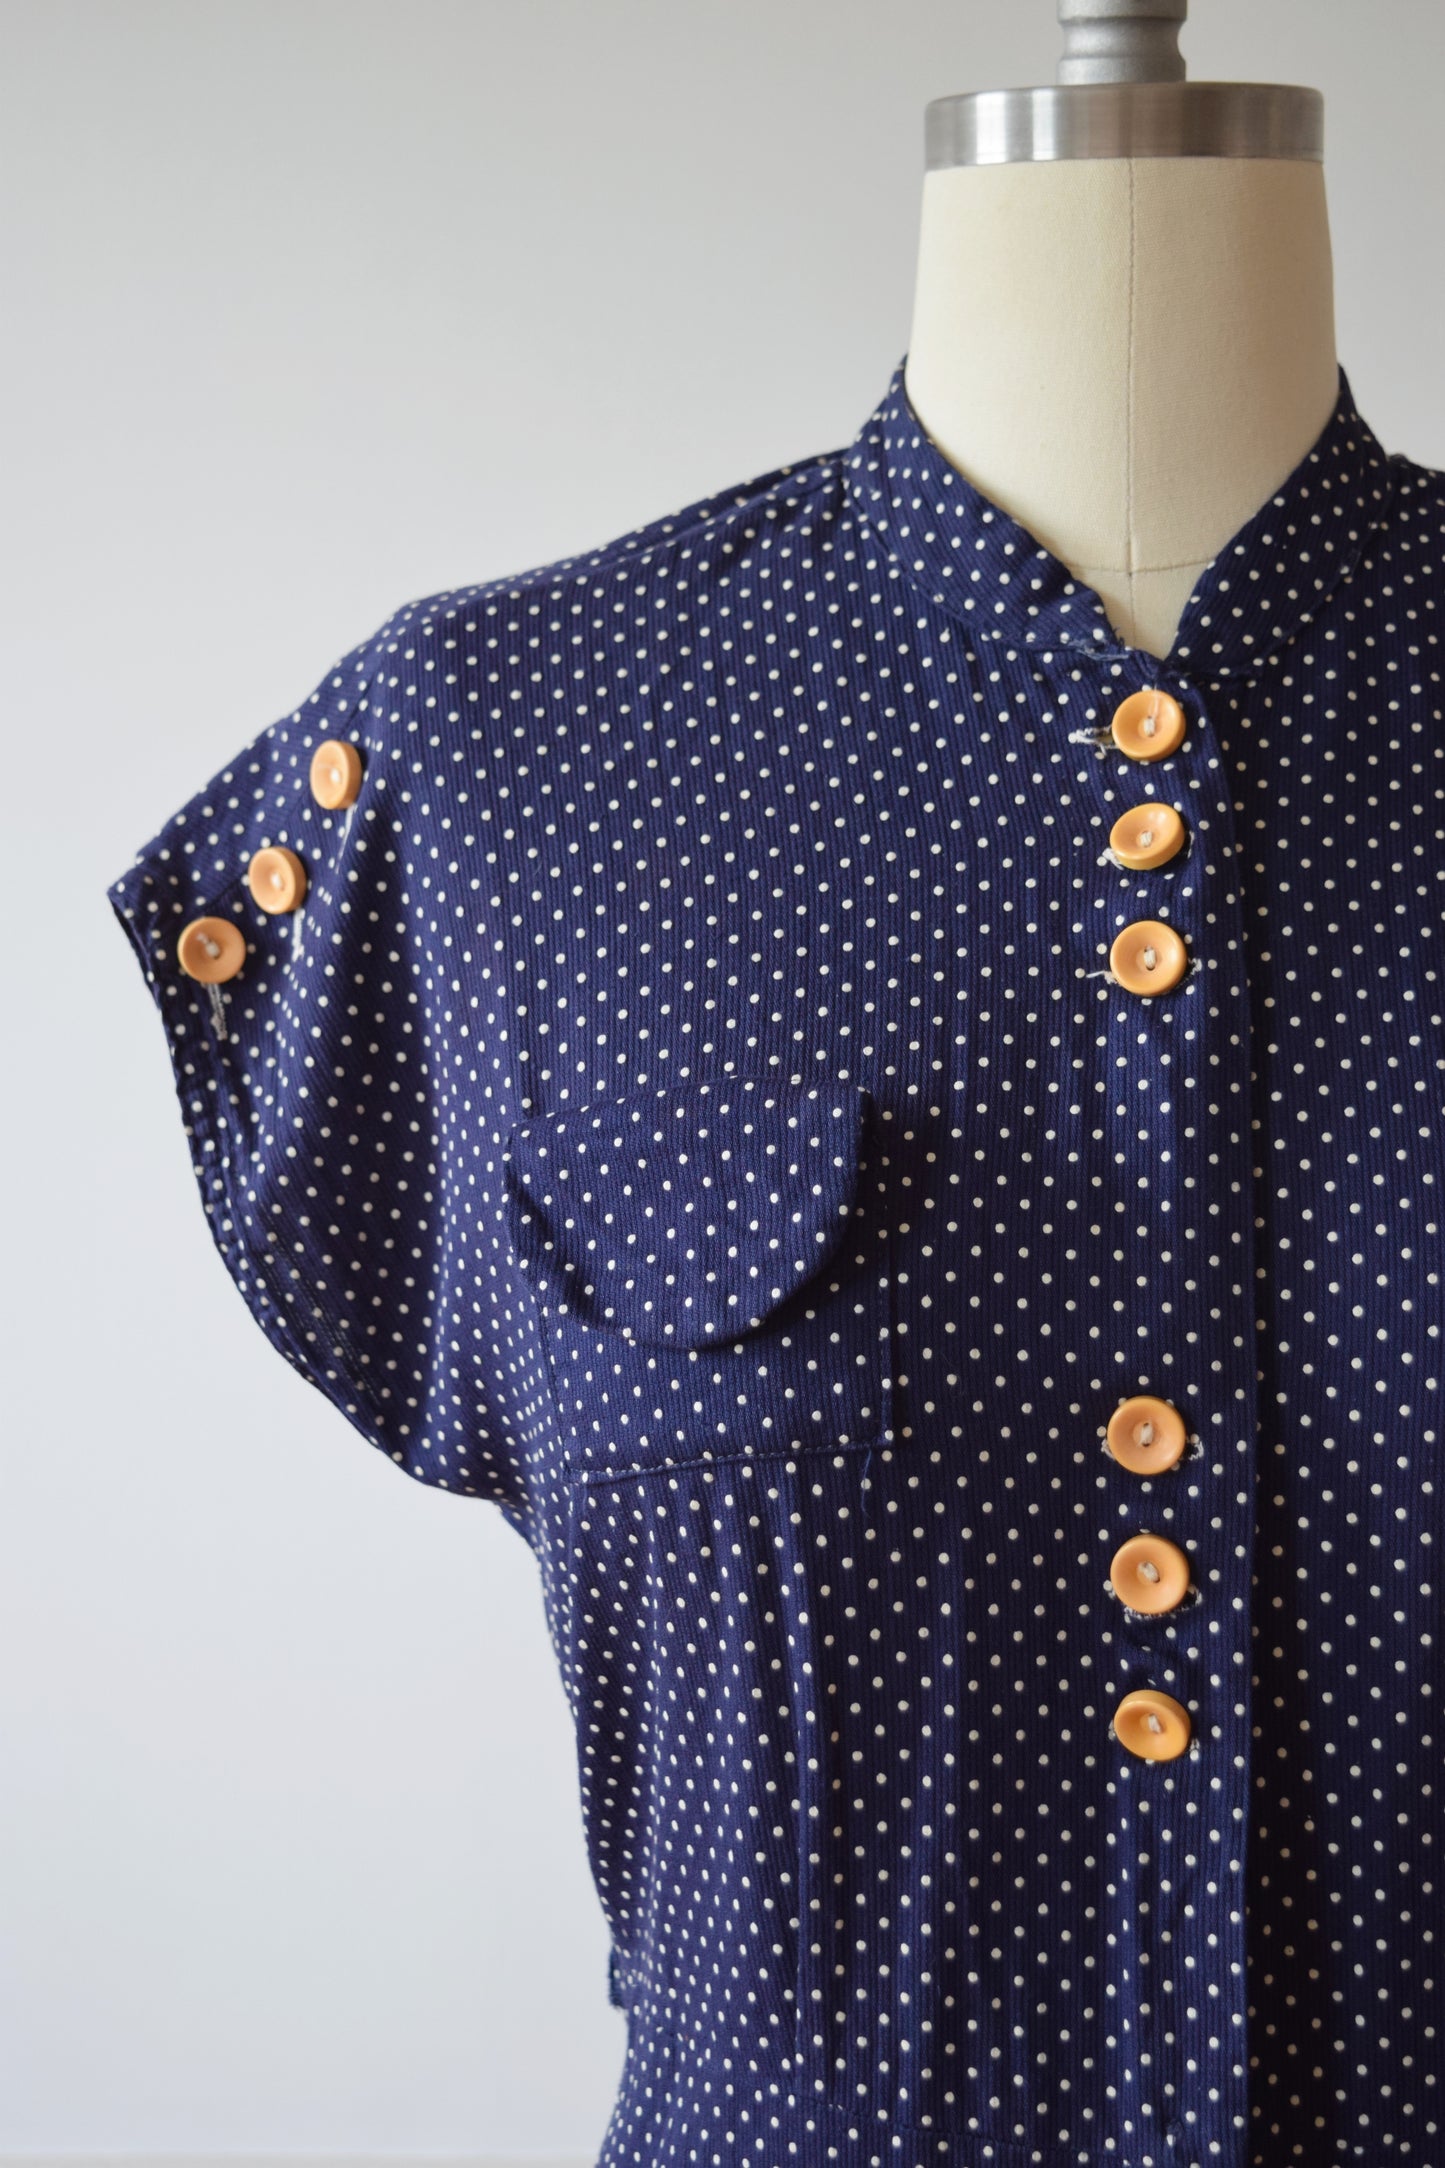 Dotted Day Dress with Bakelite Buttons | 1930s | M